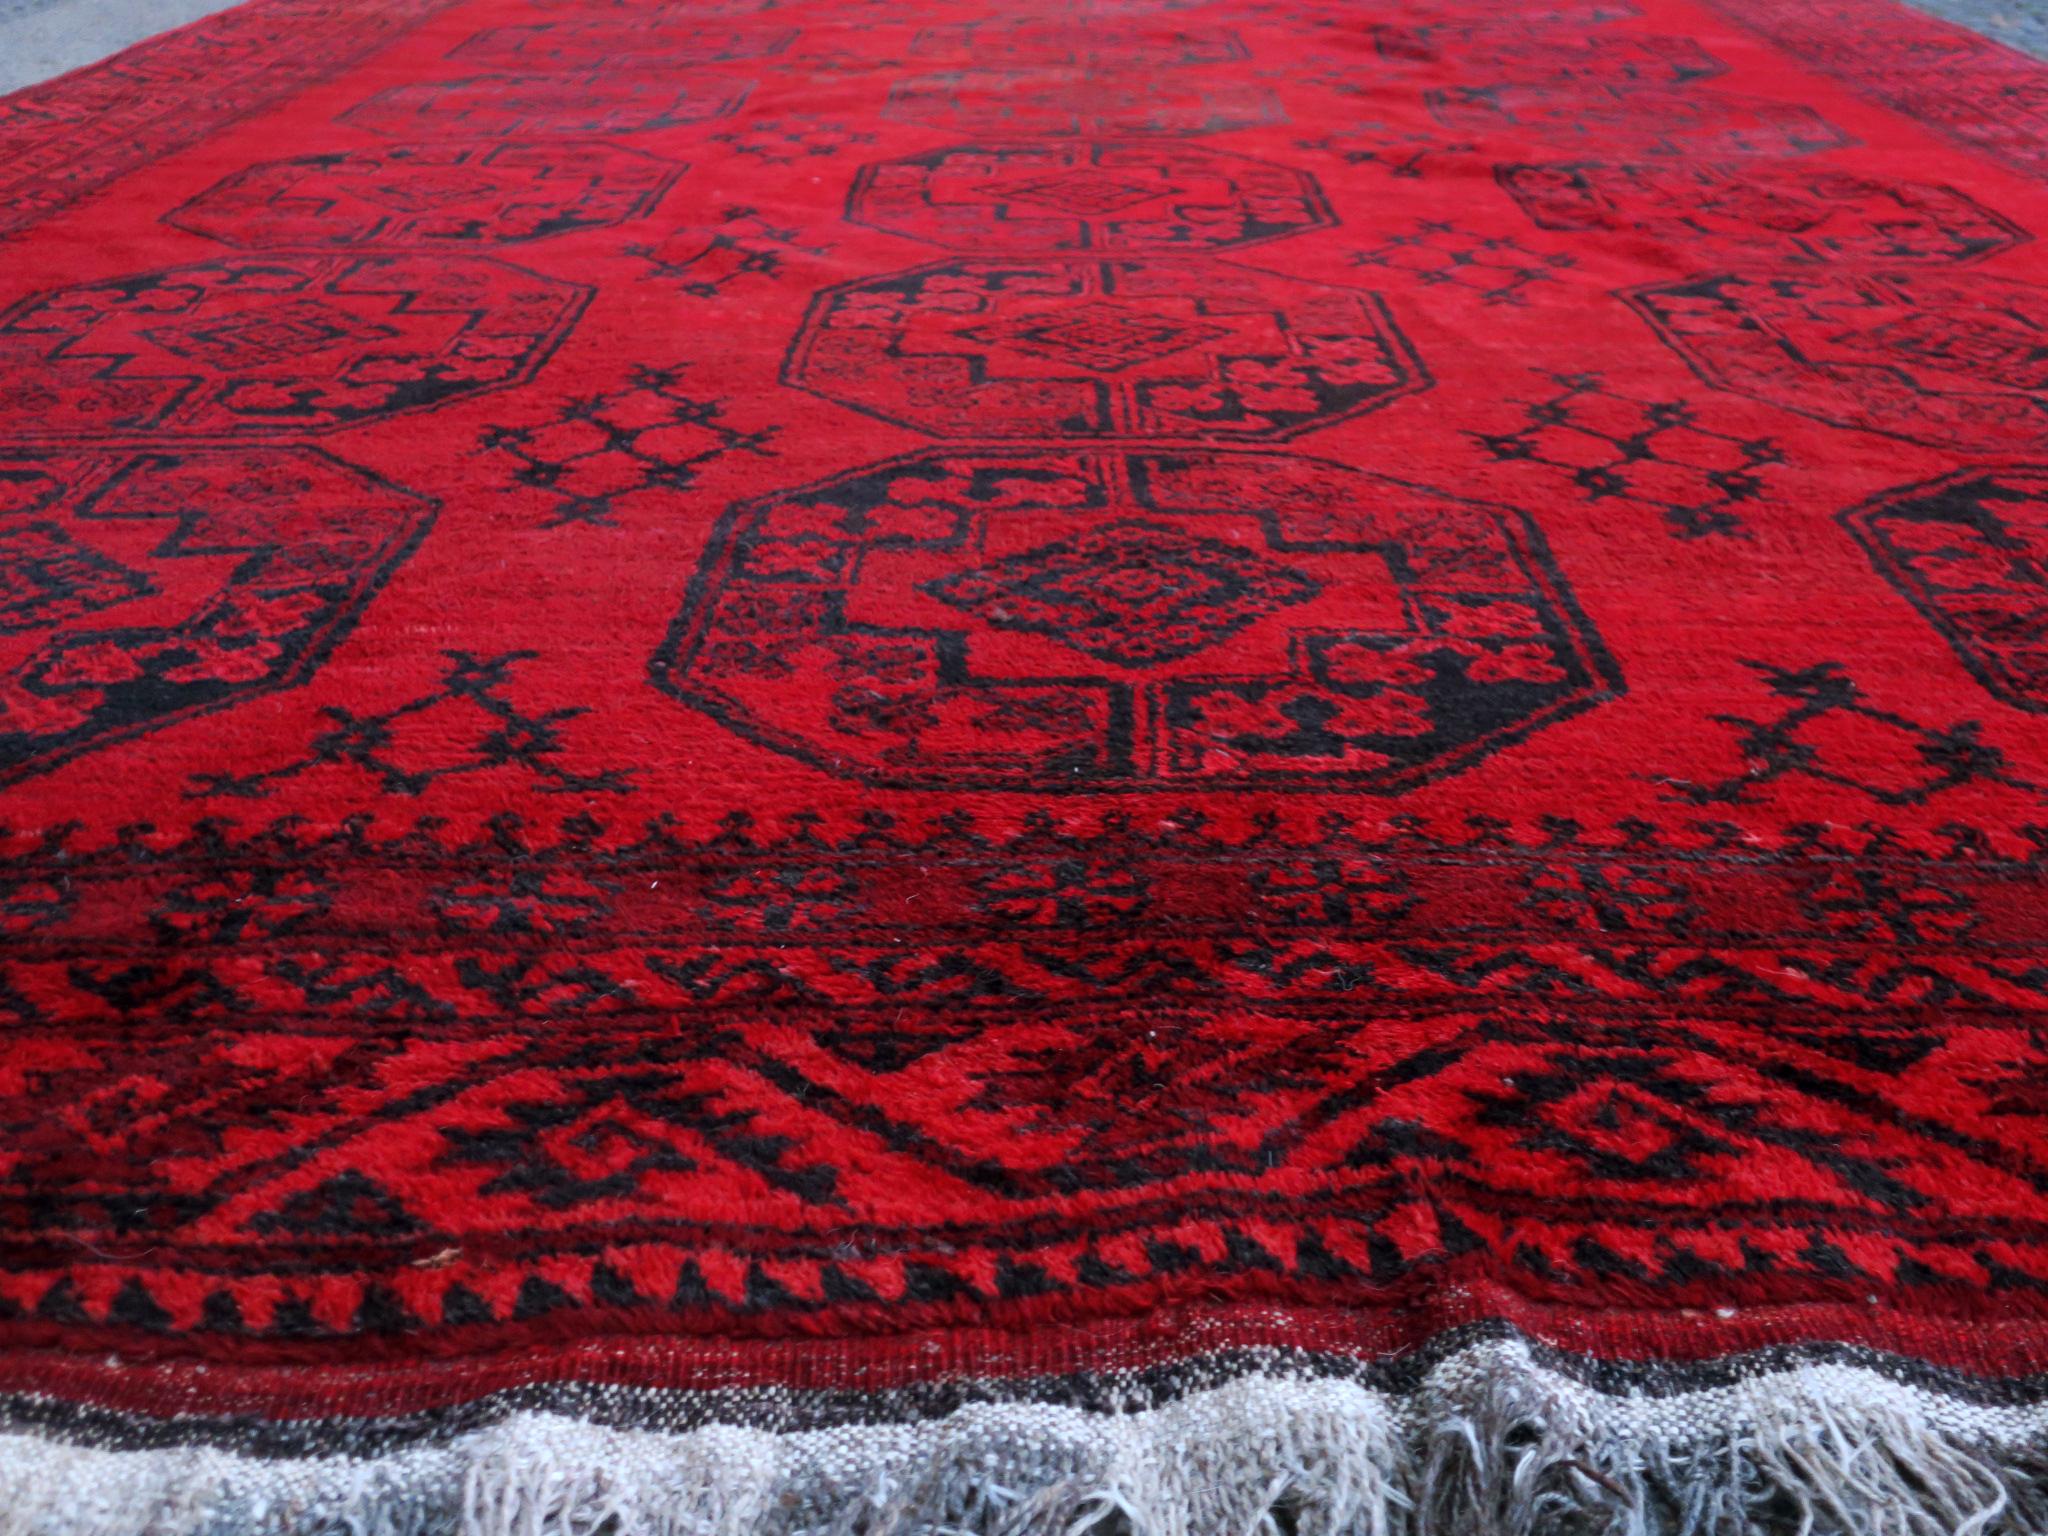 Antique Ersari Afghan rug dating from circa 1920 with rich red background color in very good condition with minimal signs of age and use.
Quite a large size.